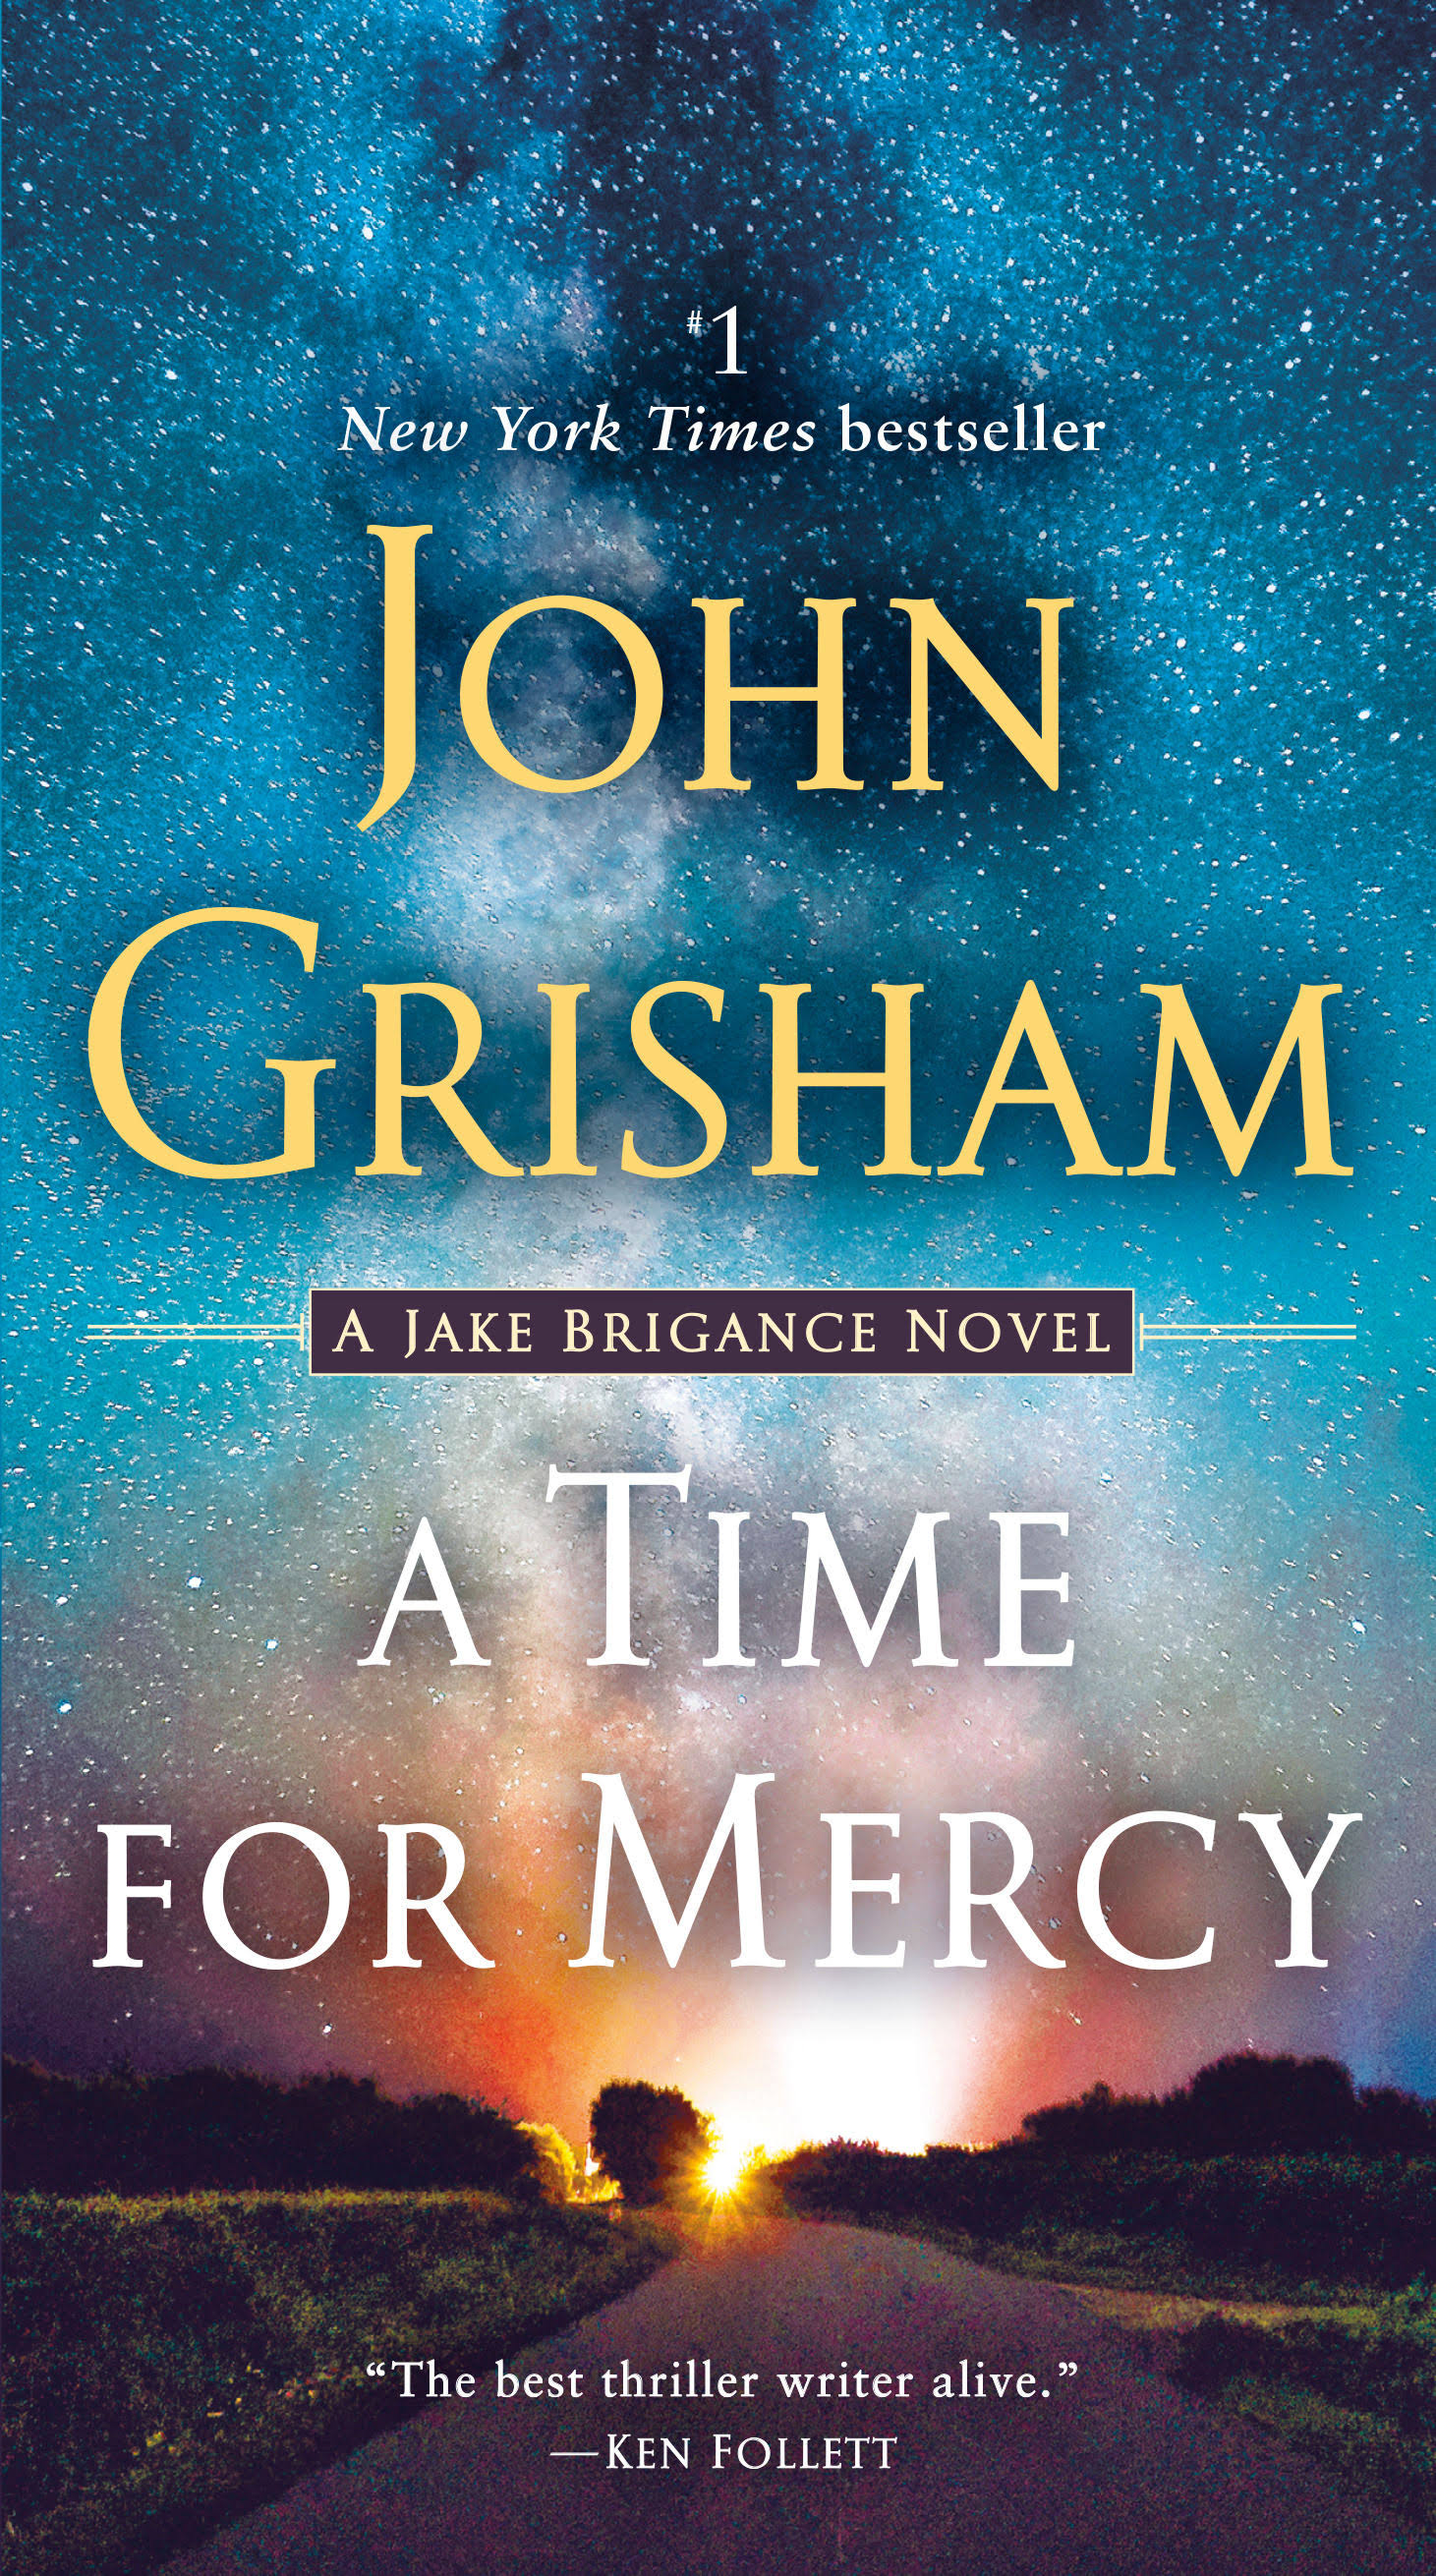 A Time for Mercy (Jake Brigance) by John Grisham